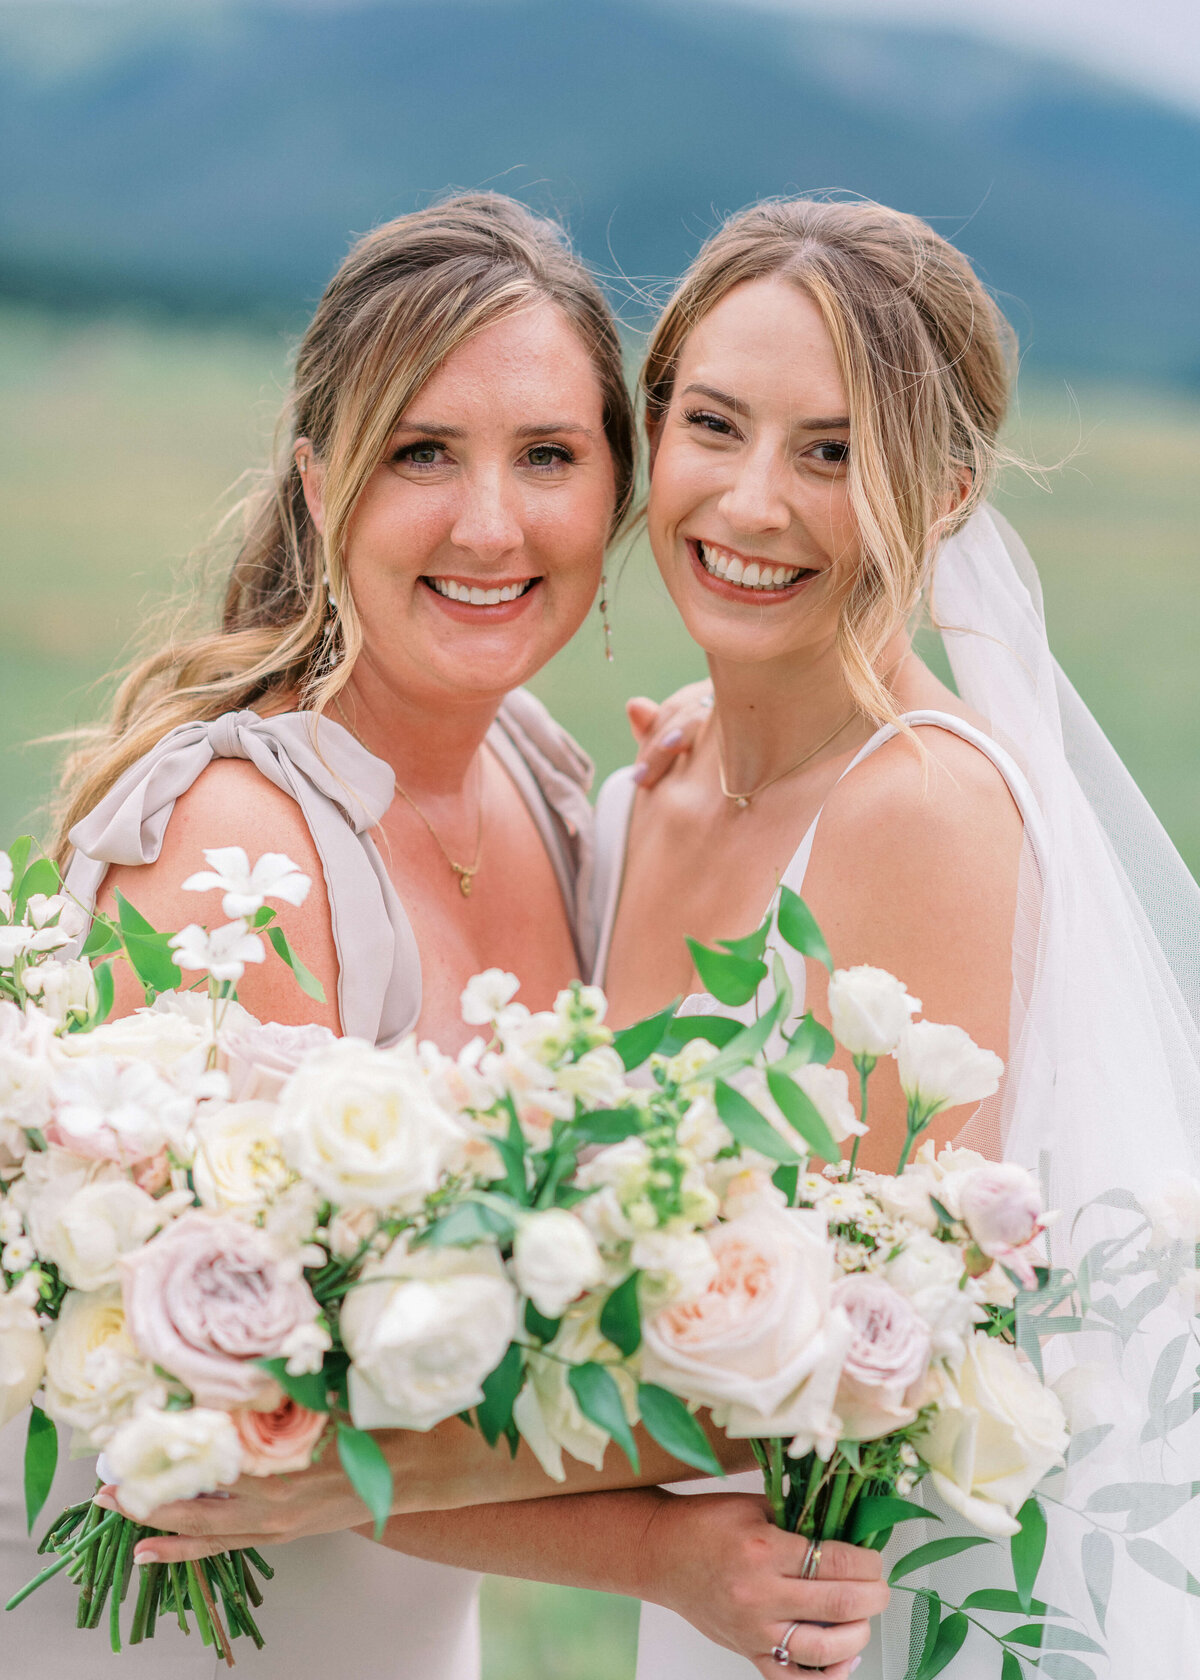 The bride and her maid of honor share a hug and smile at the camera of Virginia wedding photographer